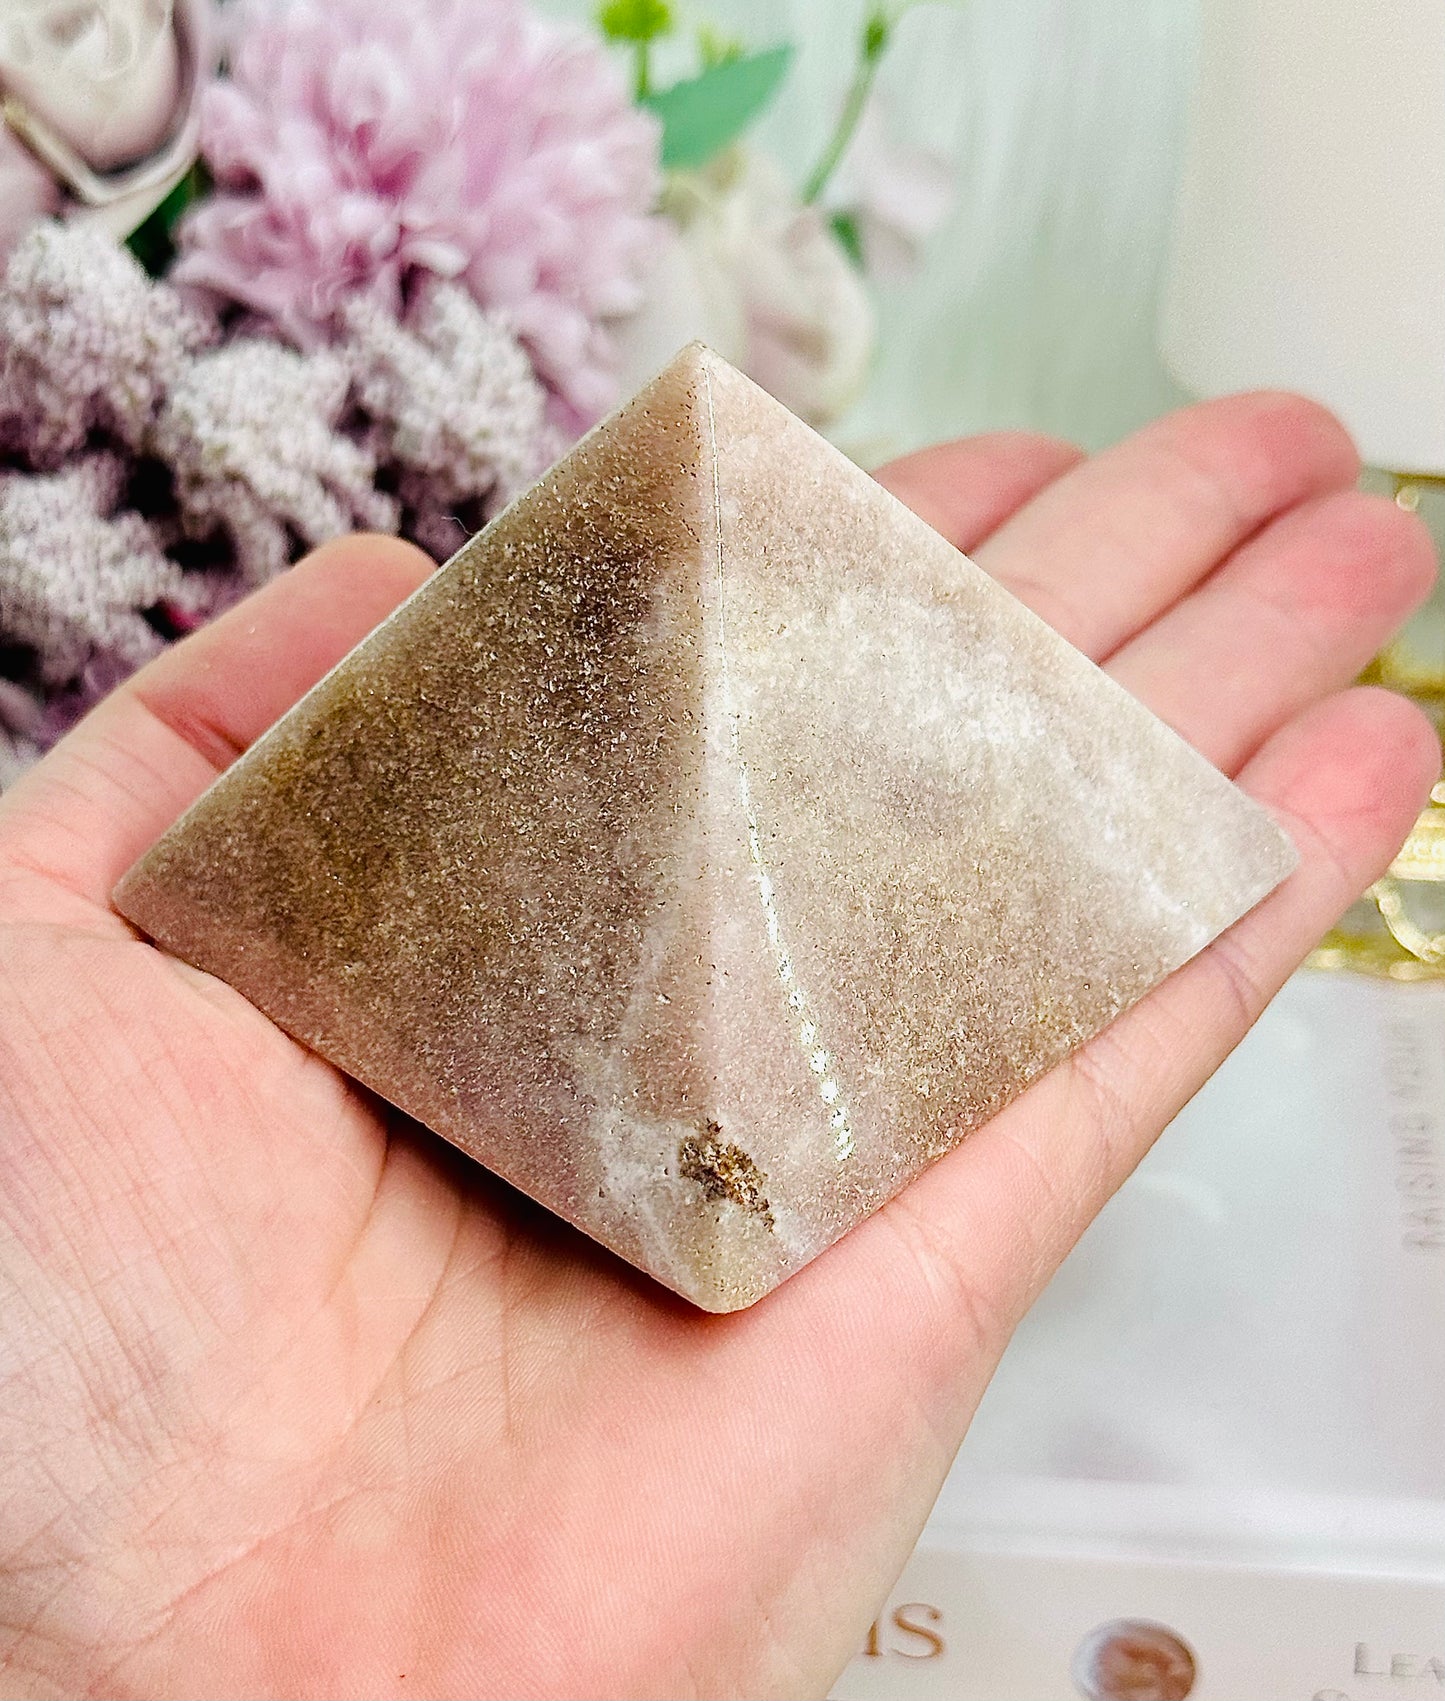 Gorgeous Pink Amethyst Carved Pyramid From Brazil